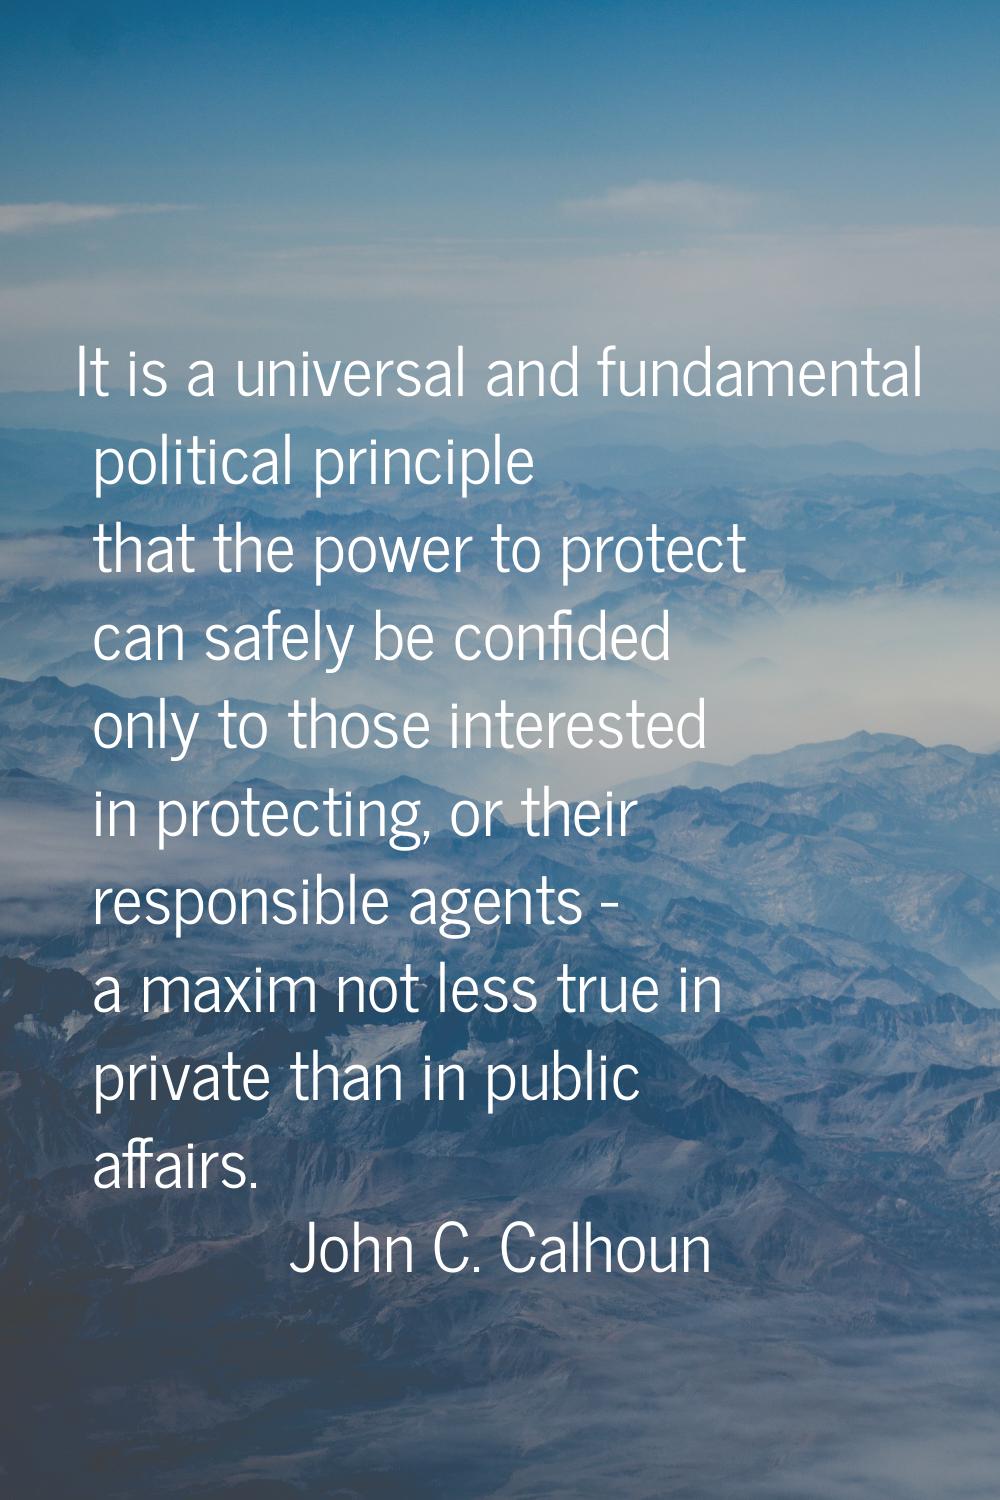 It is a universal and fundamental political principle that the power to protect can safely be confi